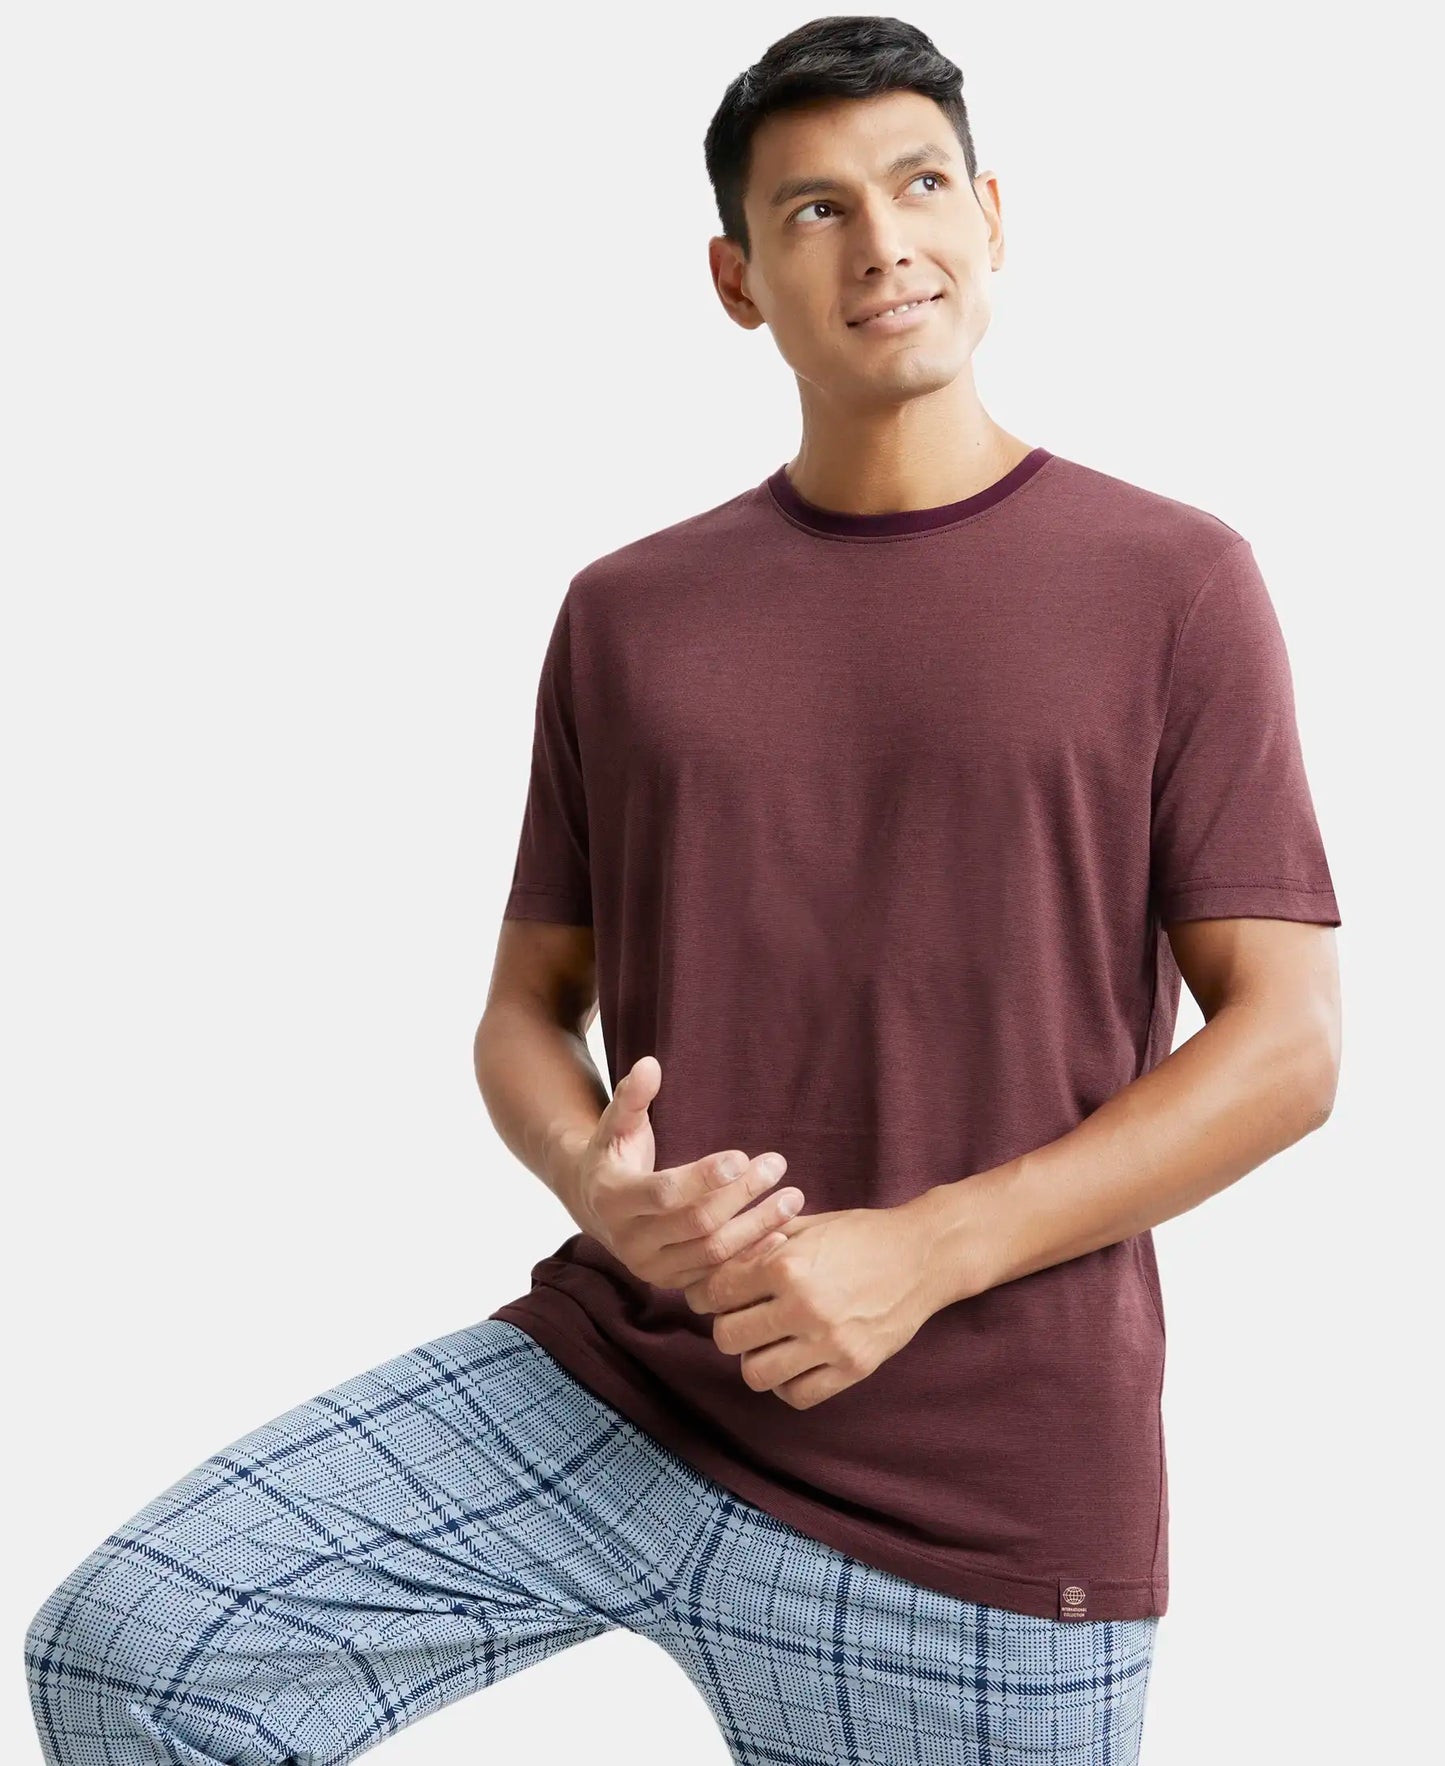 Tencel Micro Modal And Combed Cotton Blend Round Neck Half Sleeve T-Shirt - Wine tasting & Maroon-5